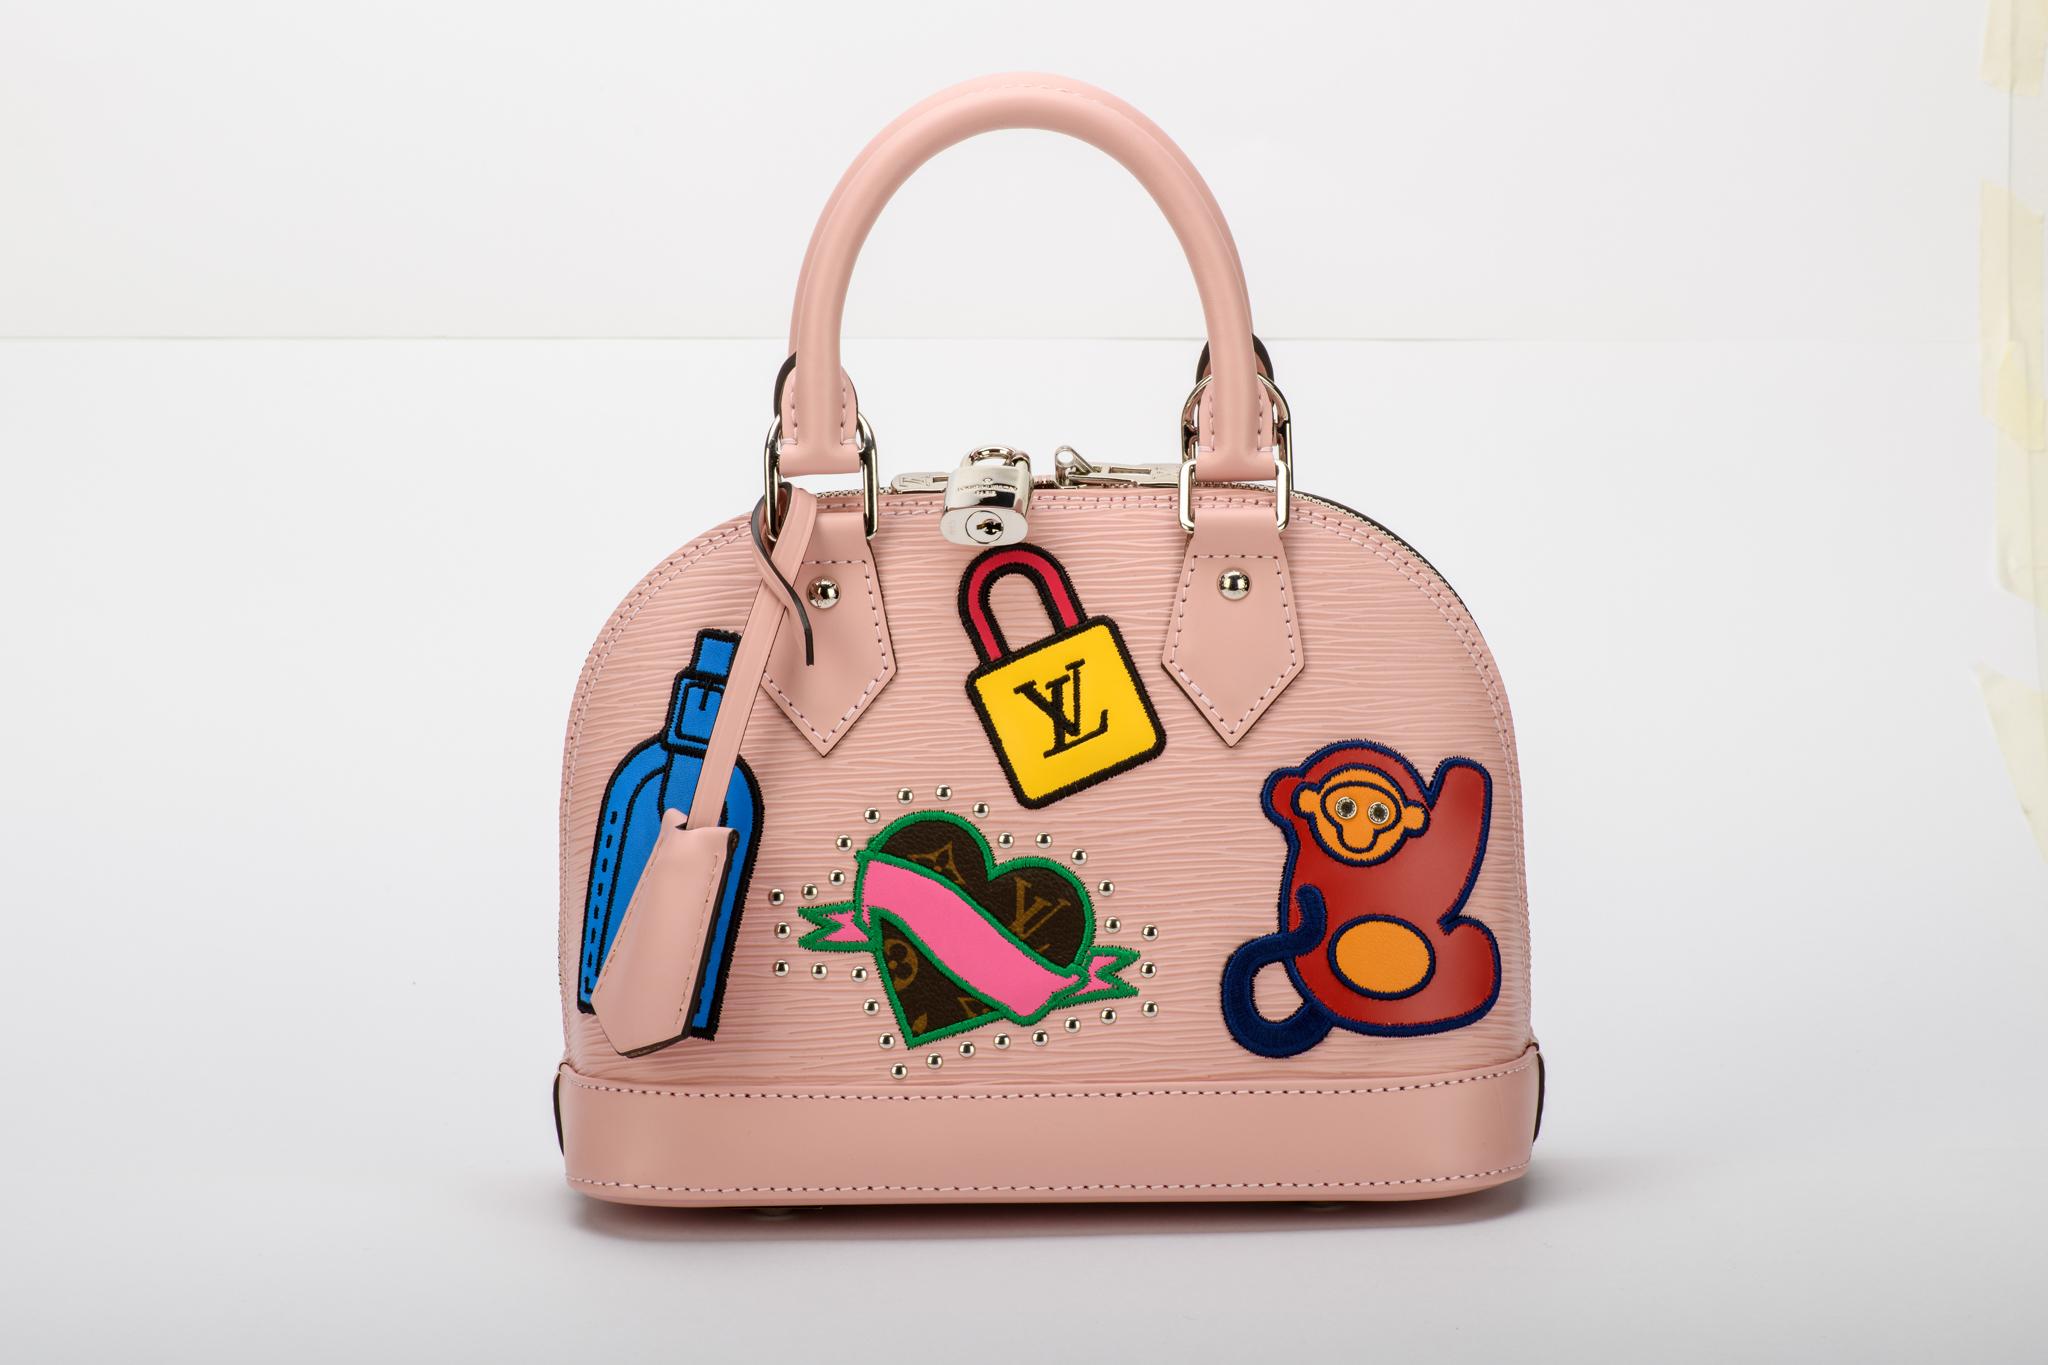 Louis Vuitton Purse Pink - 198 For Sale on 1stDibs